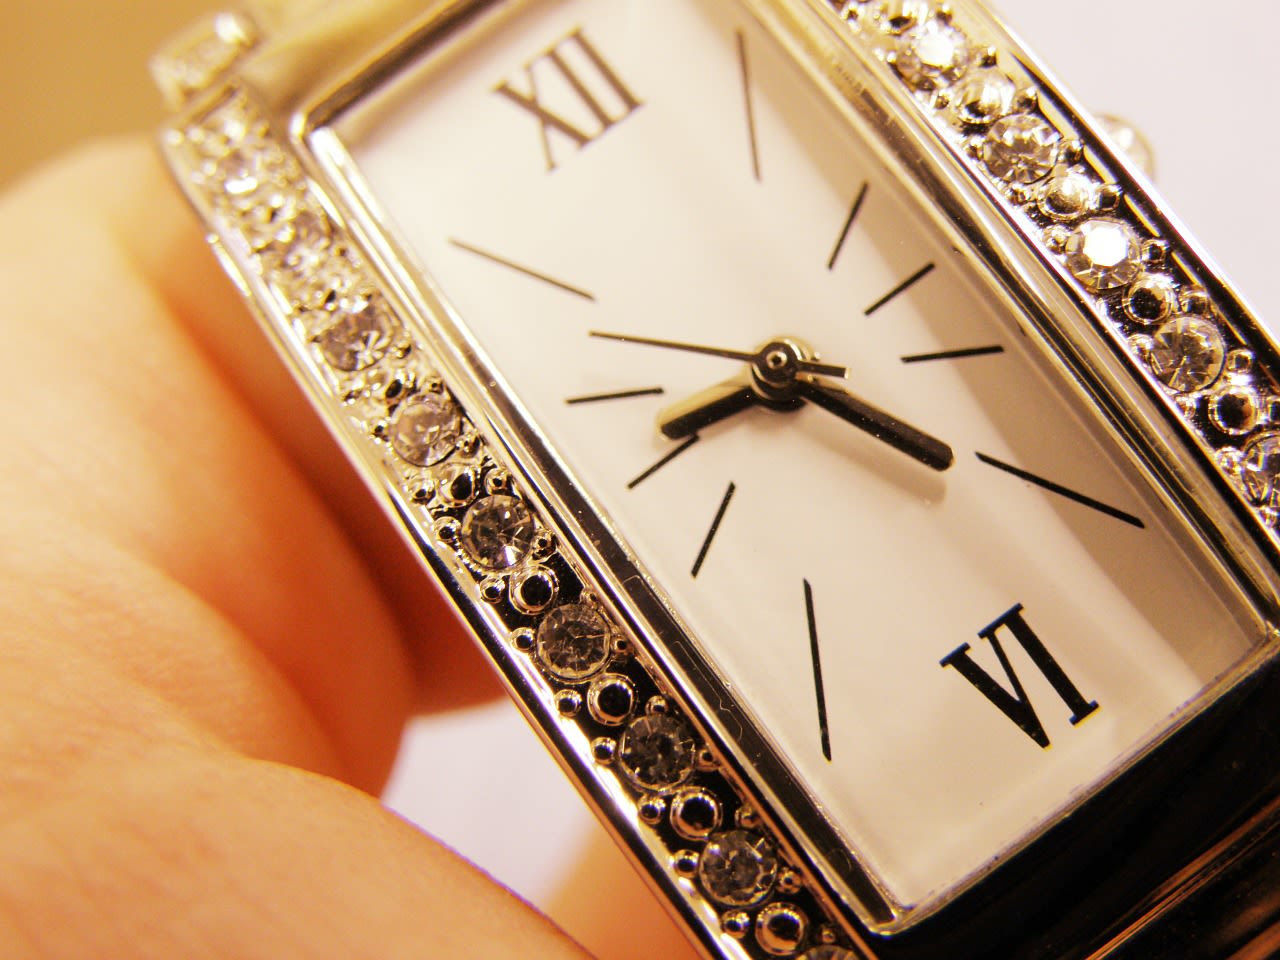 20 Most Expensive Watch Brands in the World